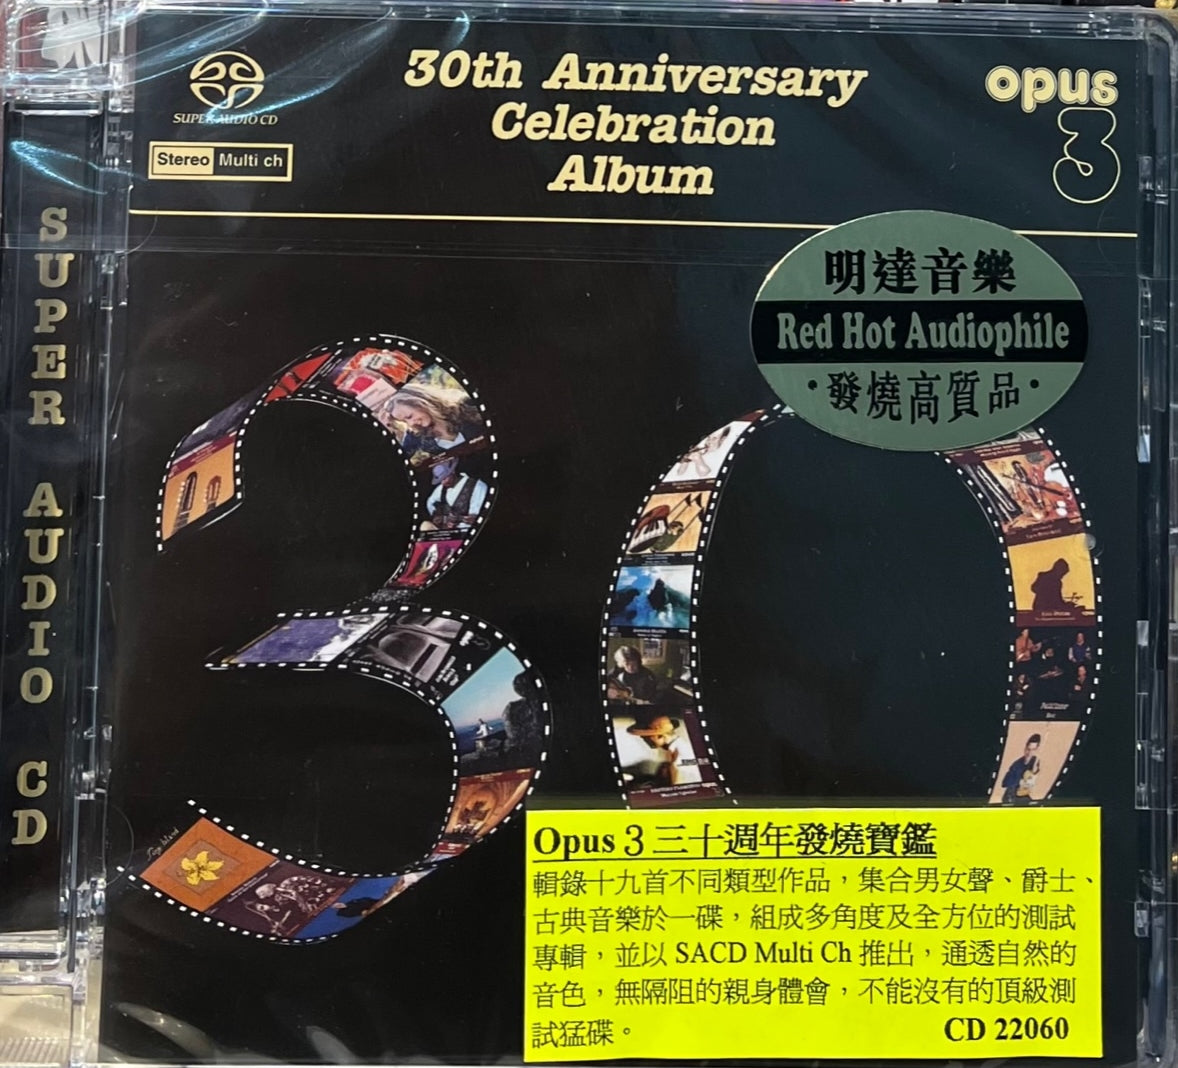 OPUS 3 30TH ANNIVERSARY CELEBRATION ALBUM - VARIOUS ARTISTS (SACD) MADE IN GERMANY